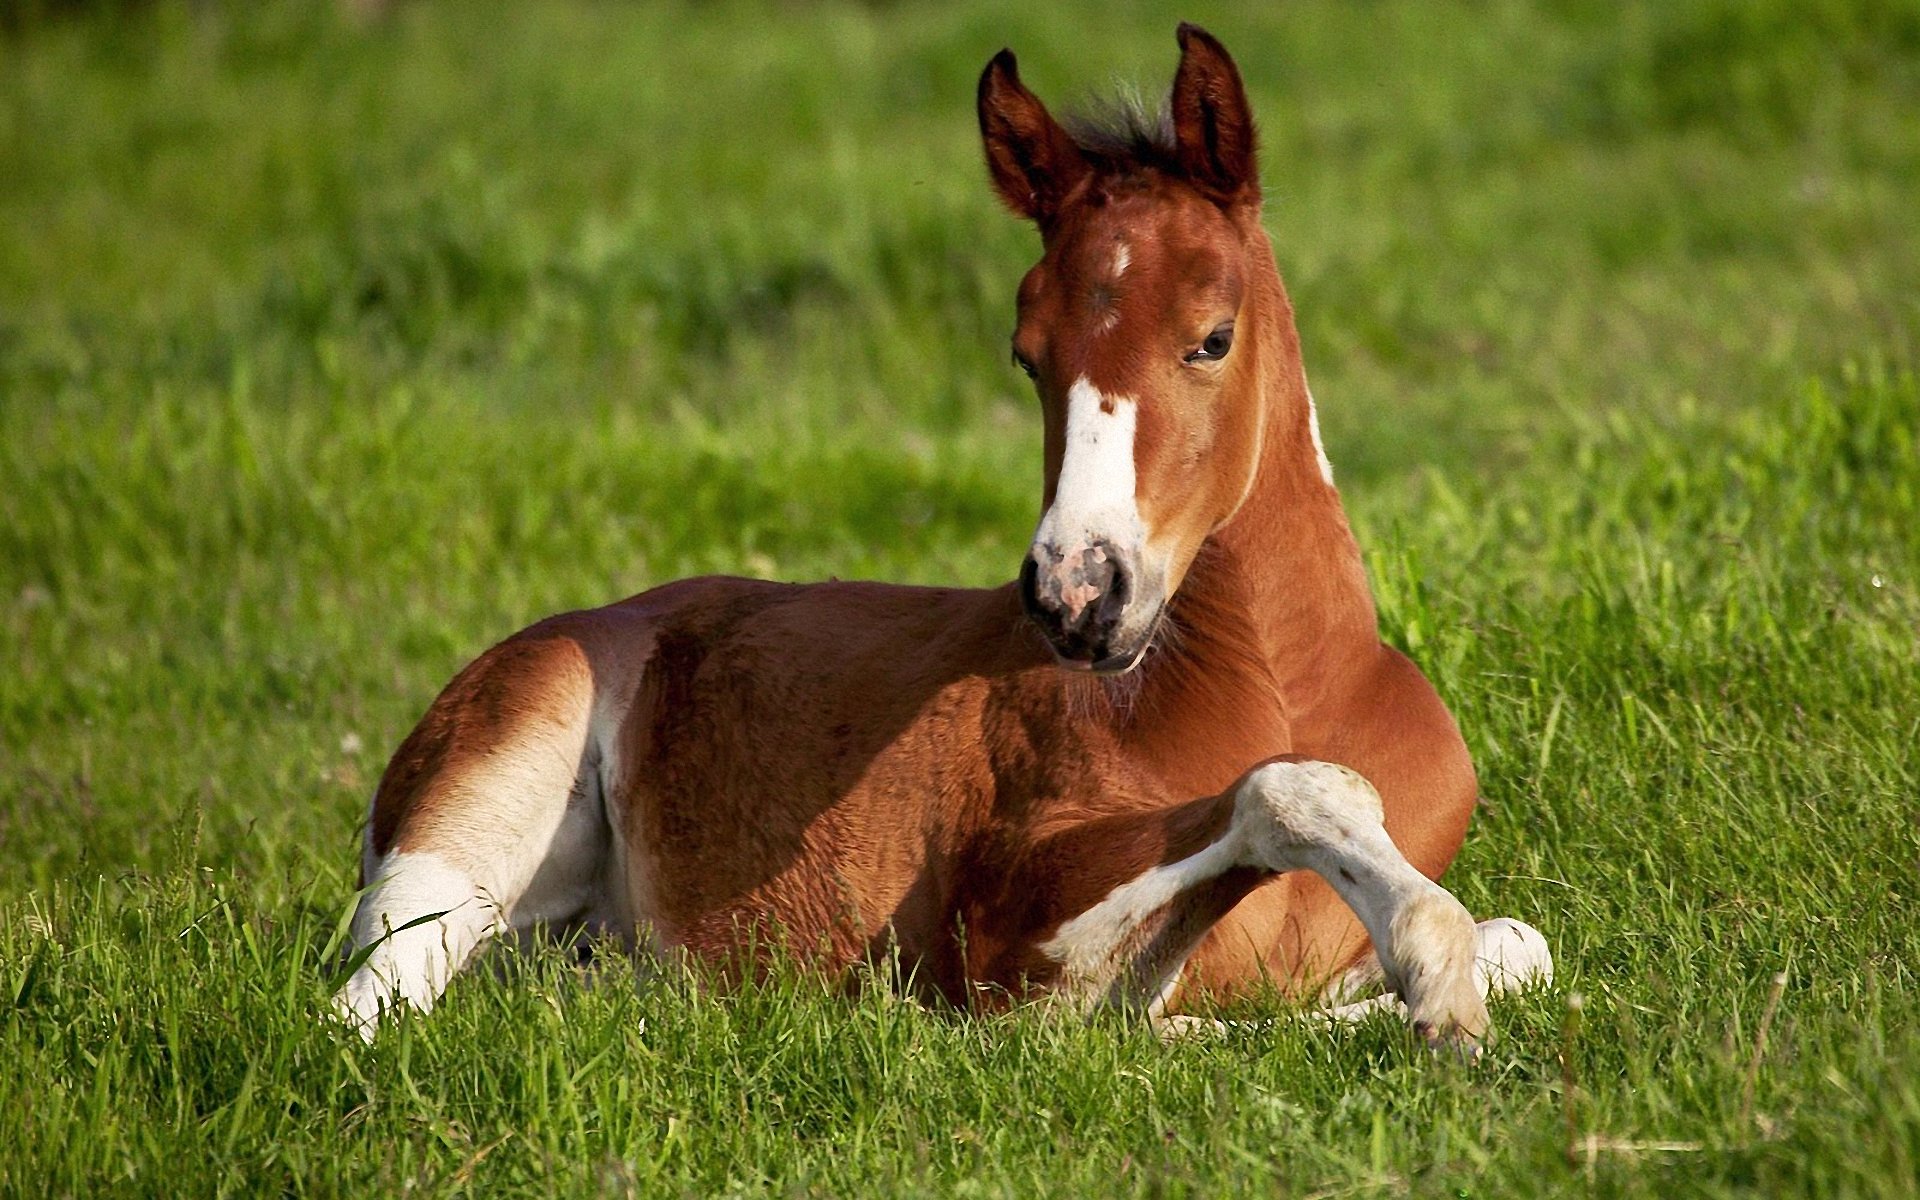 Baby Horse Laying Down